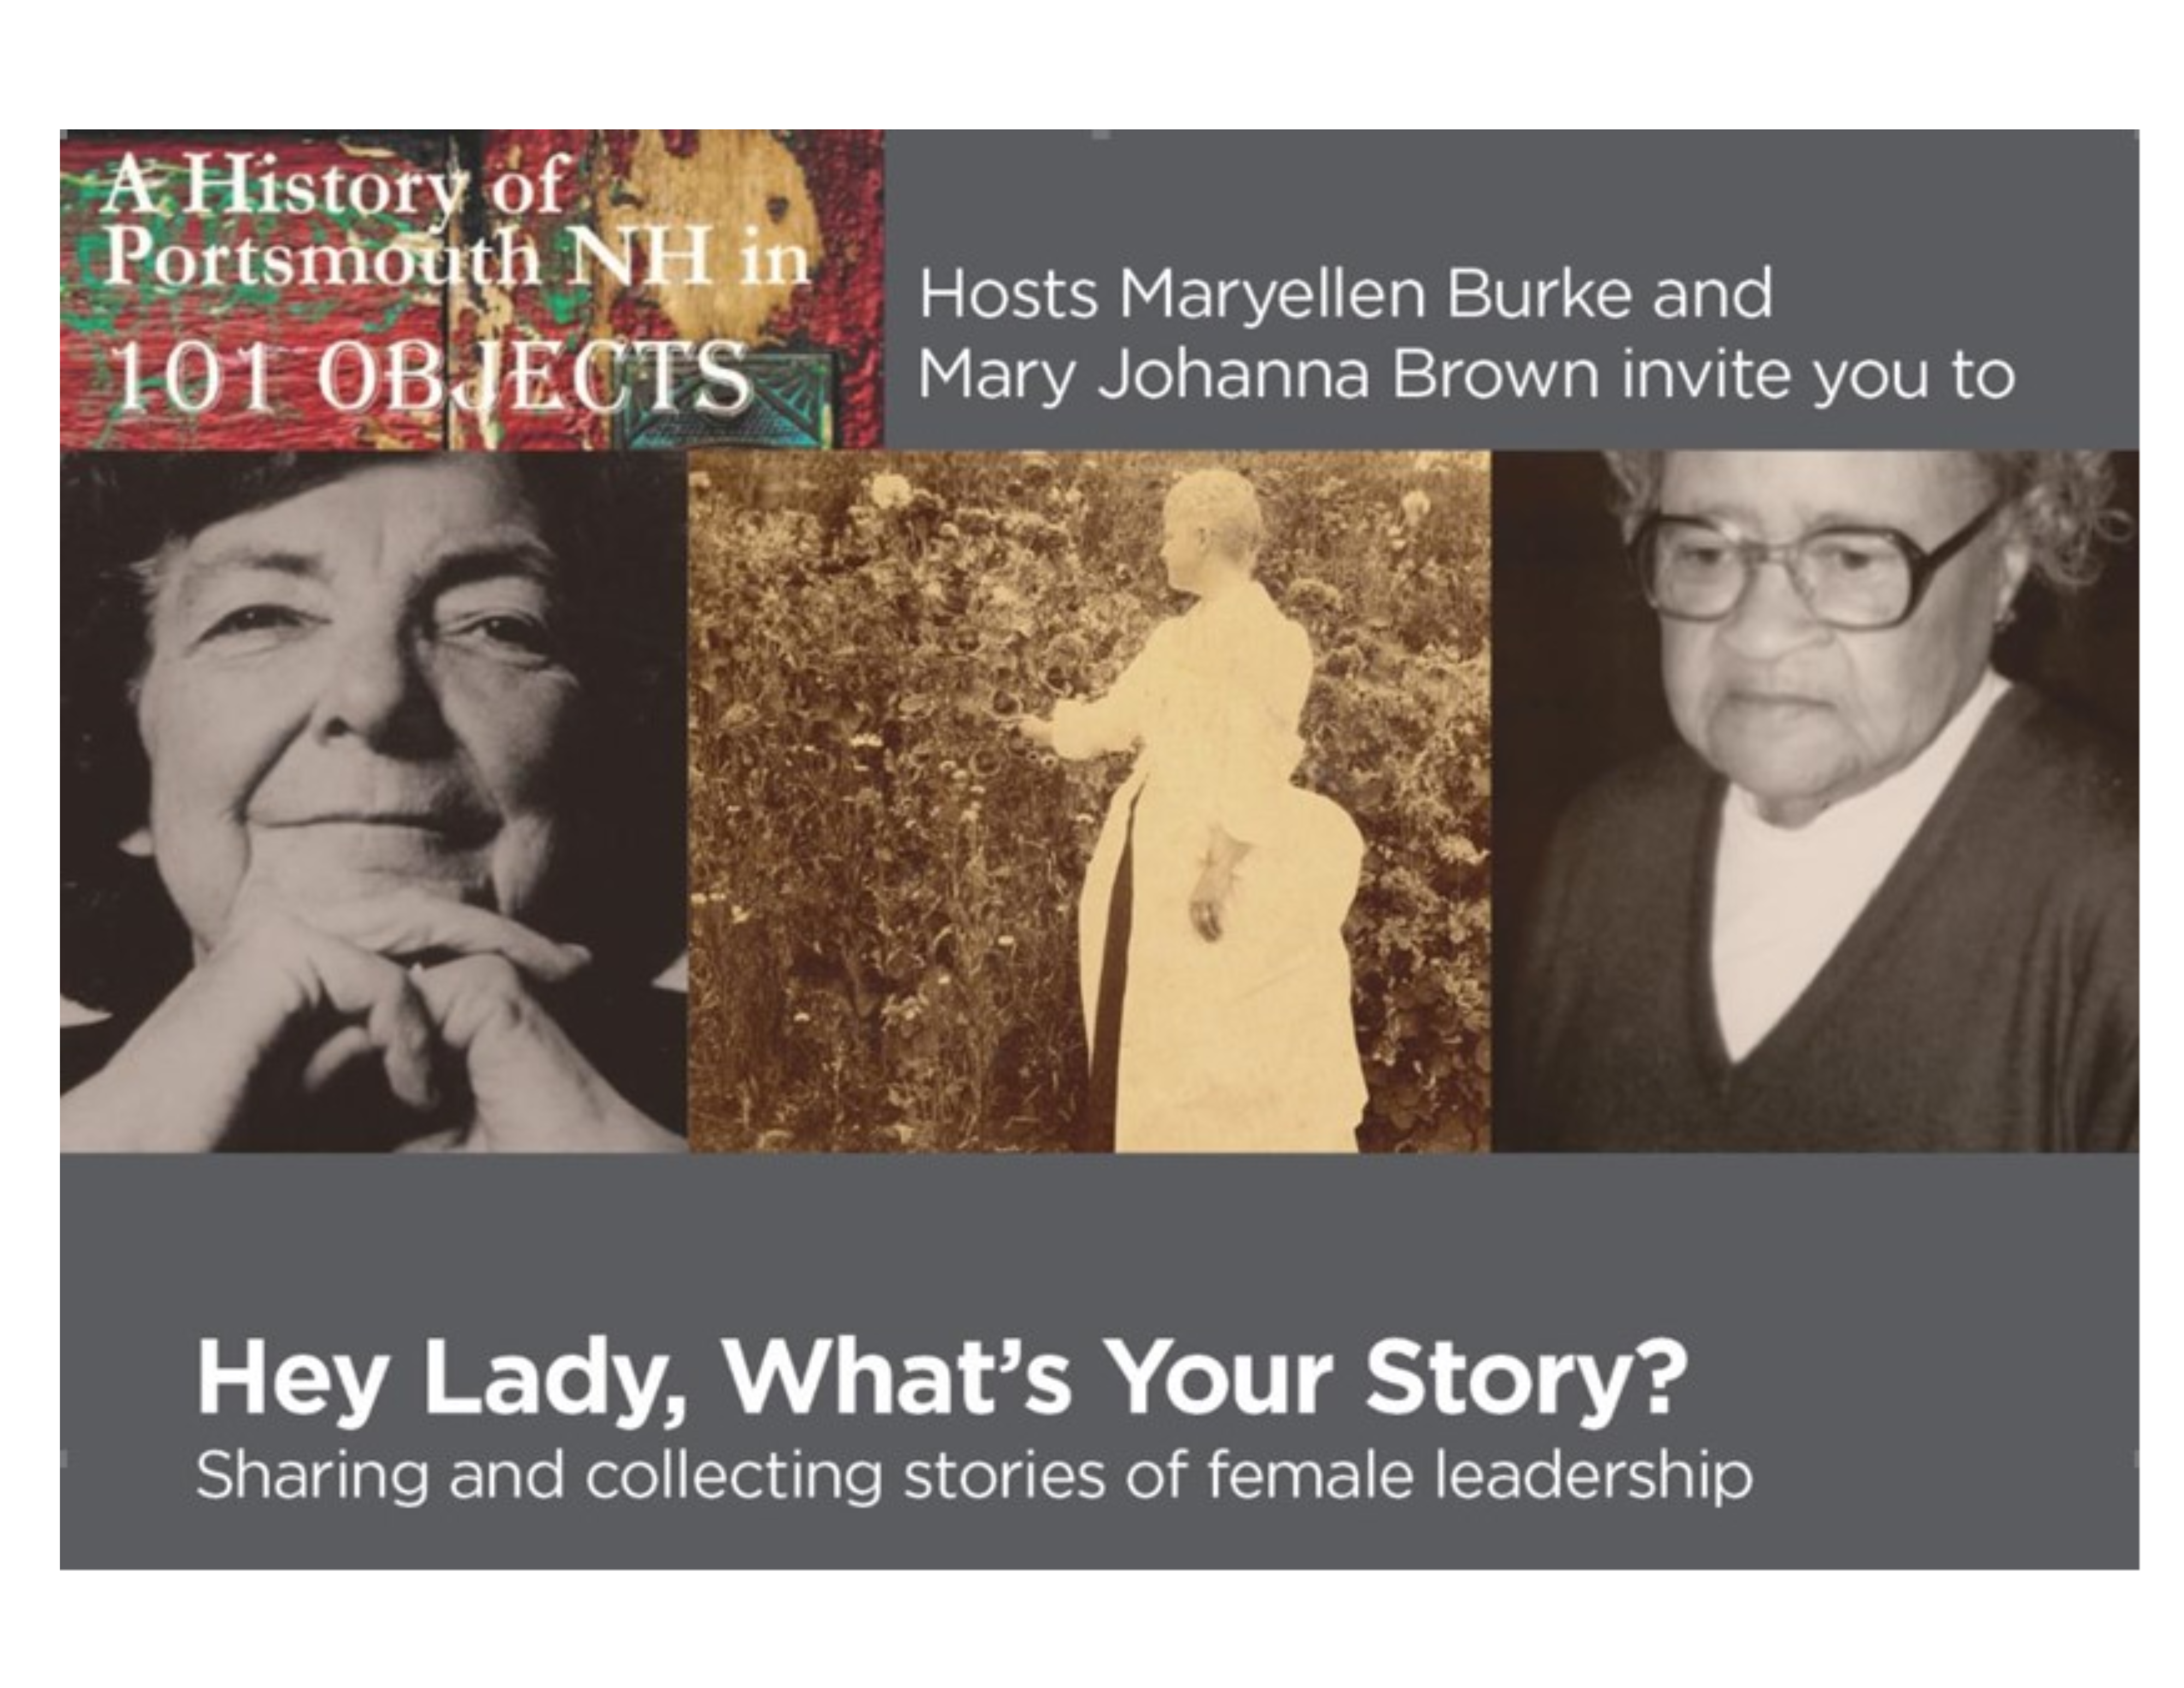 A history of Portsmouth NH 101 Objects Hey Lady What's Your Story? Celebrating  and collecting stories of female leadership Three women in black and white photos